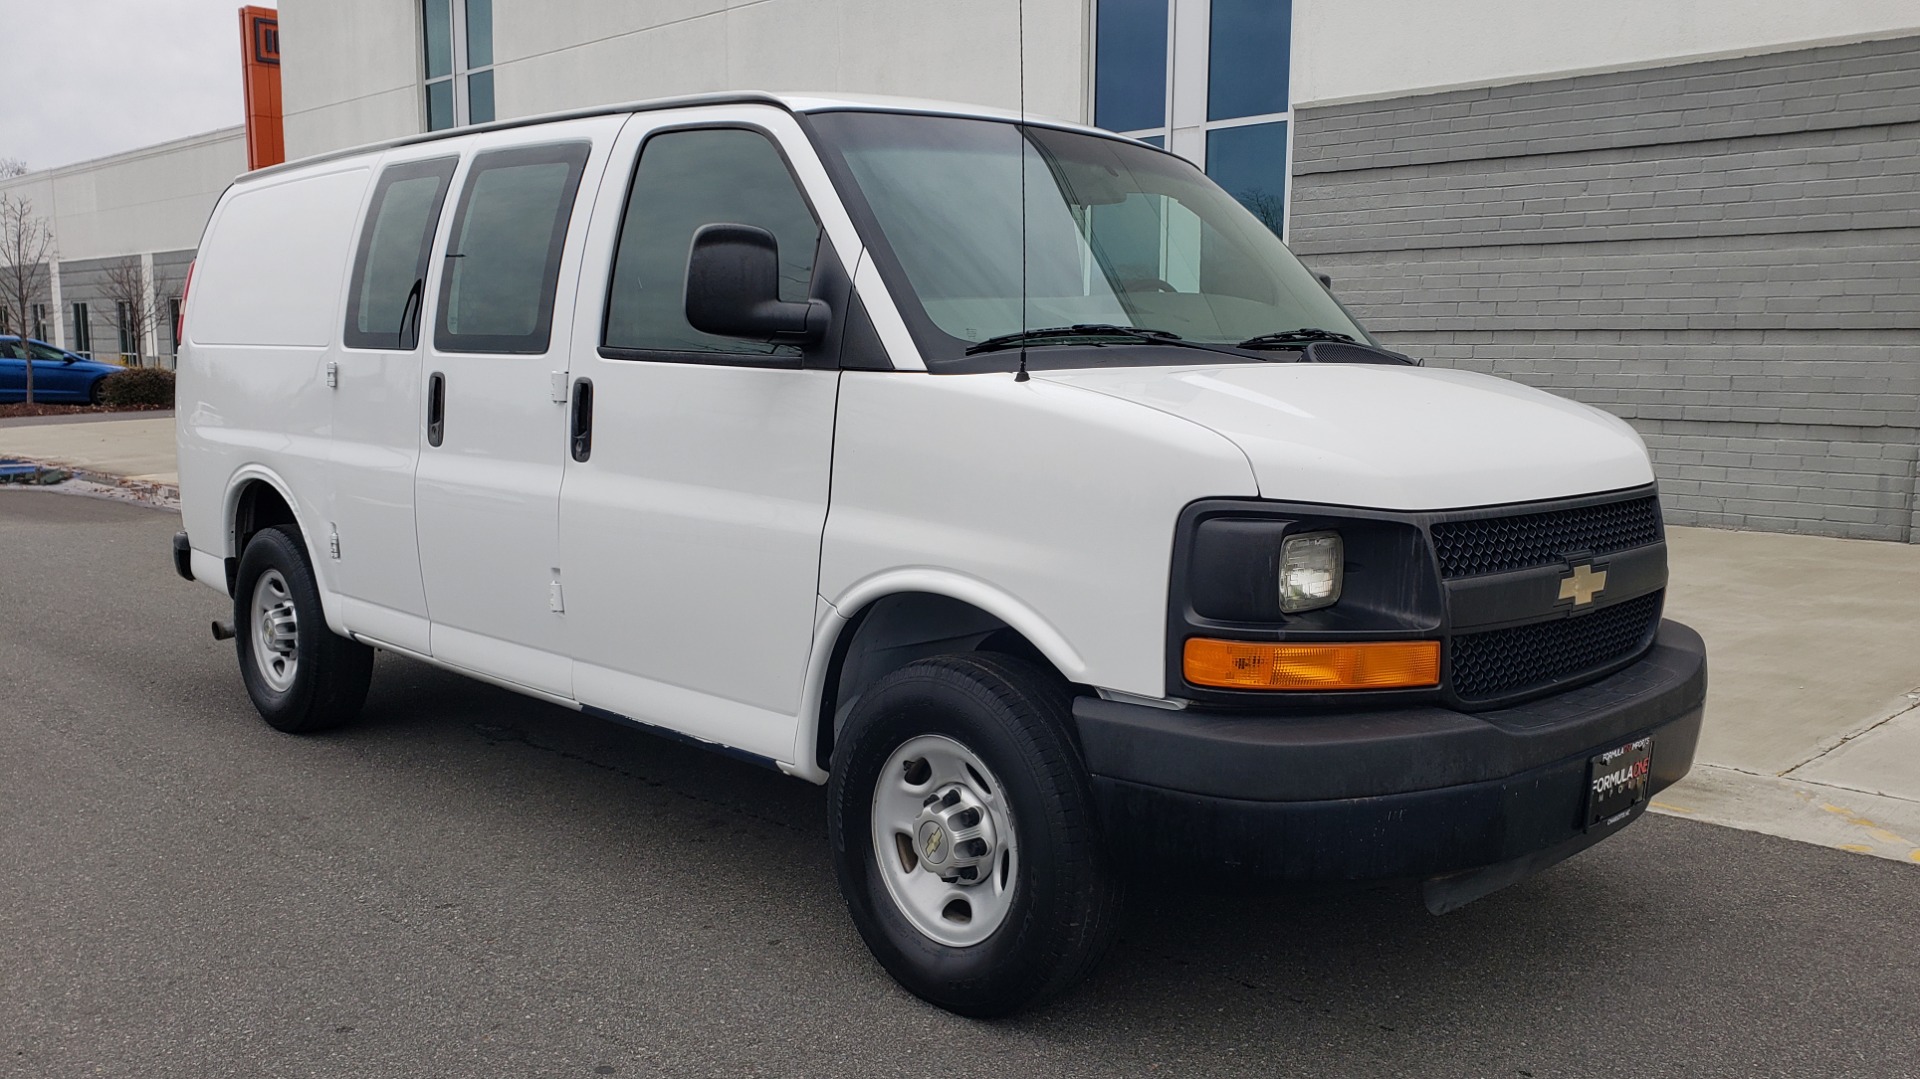 Used 2013 Chevrolet EXPRESS CARGO VAN 2500 / 135IN WB / STORAGE RACKS / RUNS GREAT for sale Sold at Formula Imports in Charlotte NC 28227 4